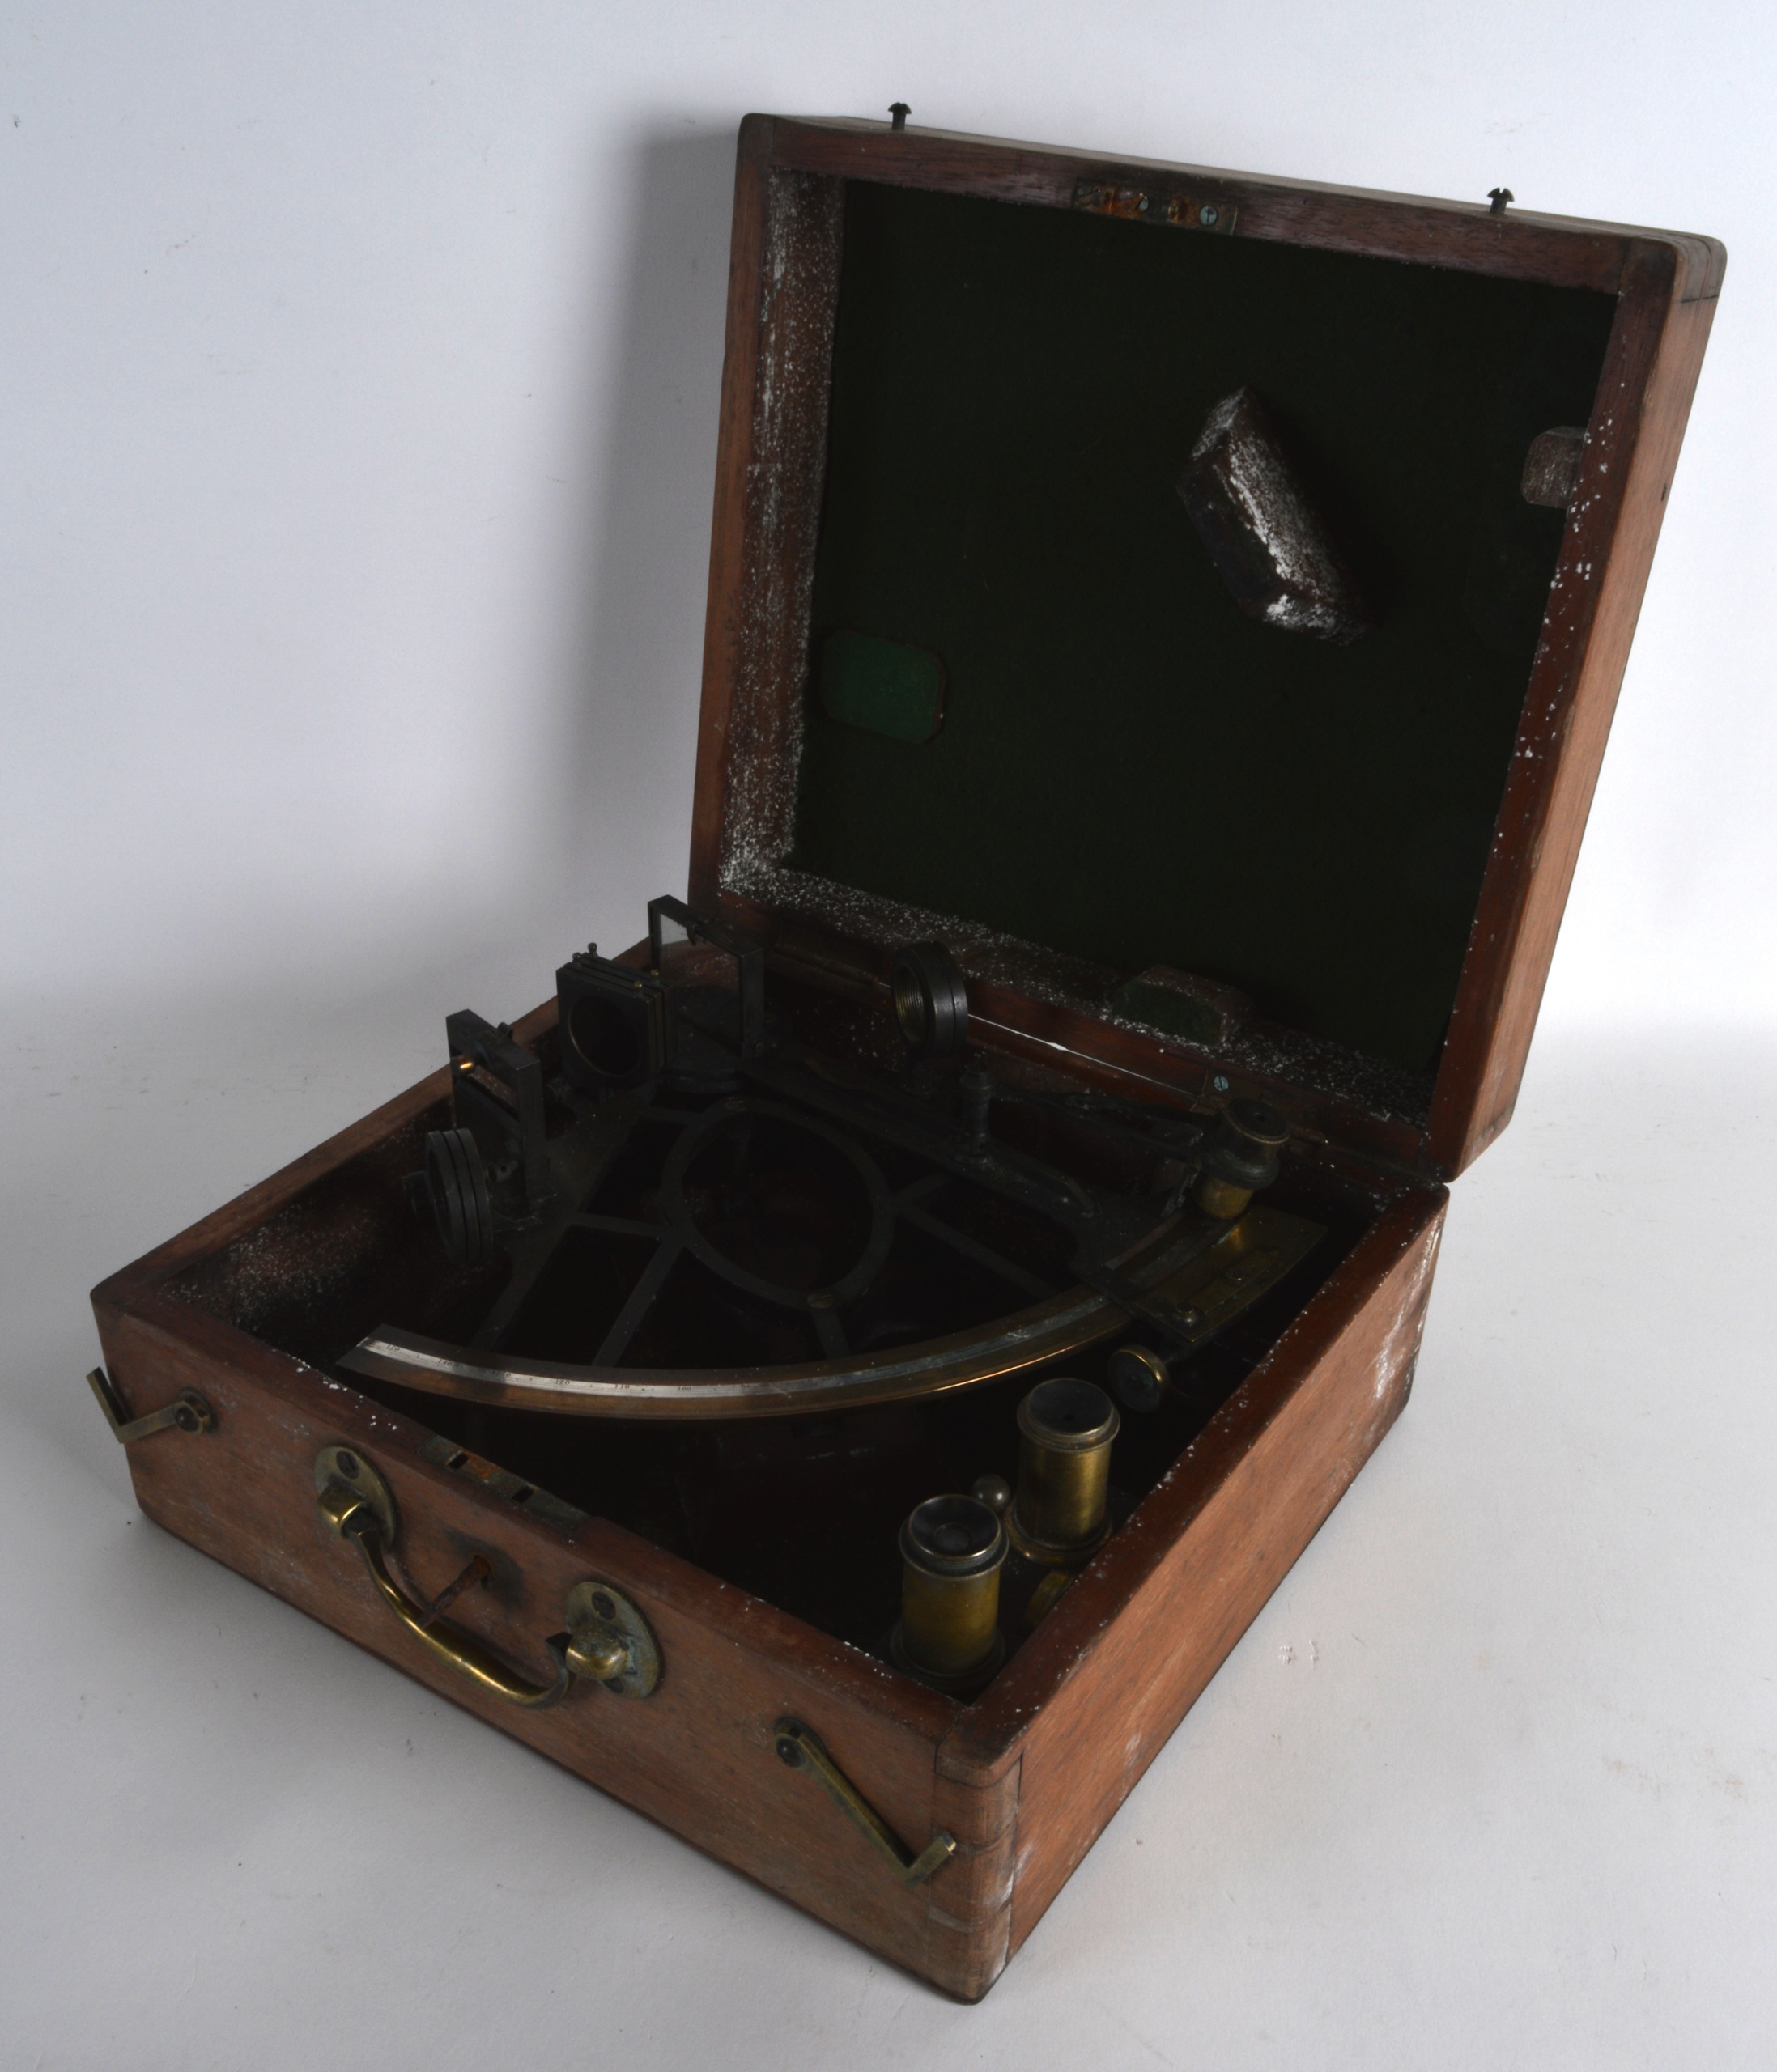 A CASED VICTORIAN MARITIME SEXTANT by Heath & Co of London, with brass fittings. Sextant 9.5ins